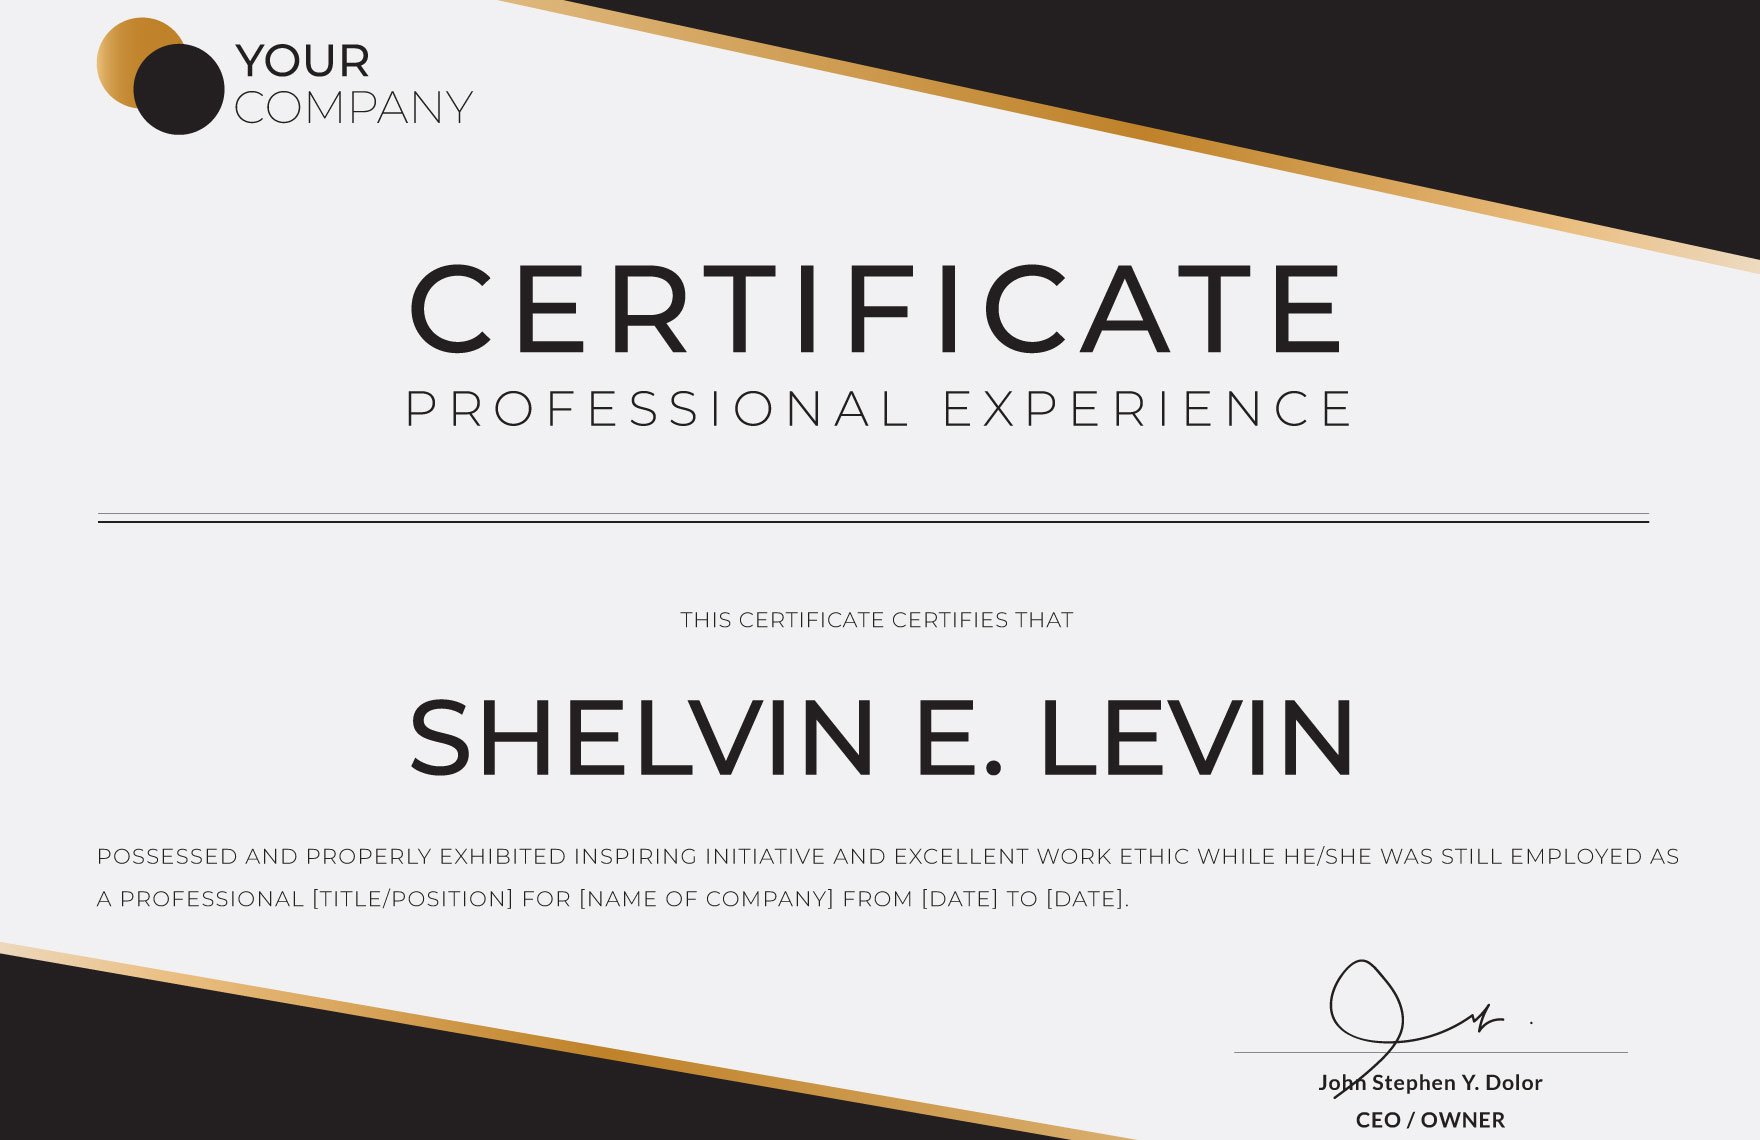 Professional Experience Certificate Template in Word, Google Docs, Illustrator, PSD, Apple Pages, InDesign, Outlook